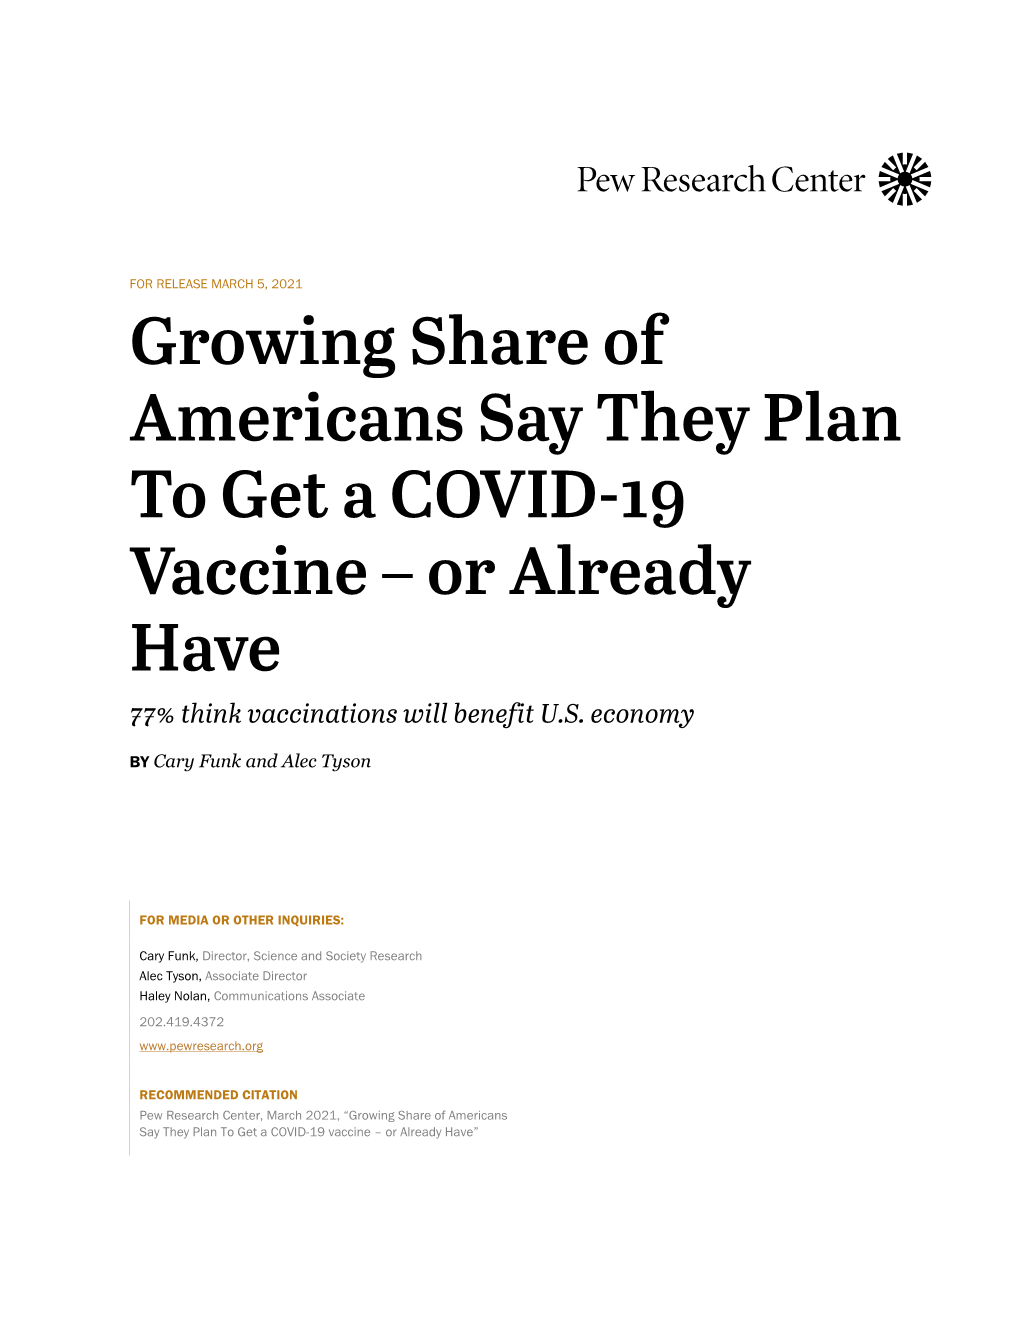 Growing Share of Americans Say They Plan to Get a COVID-19 Vaccine – Or Already Have